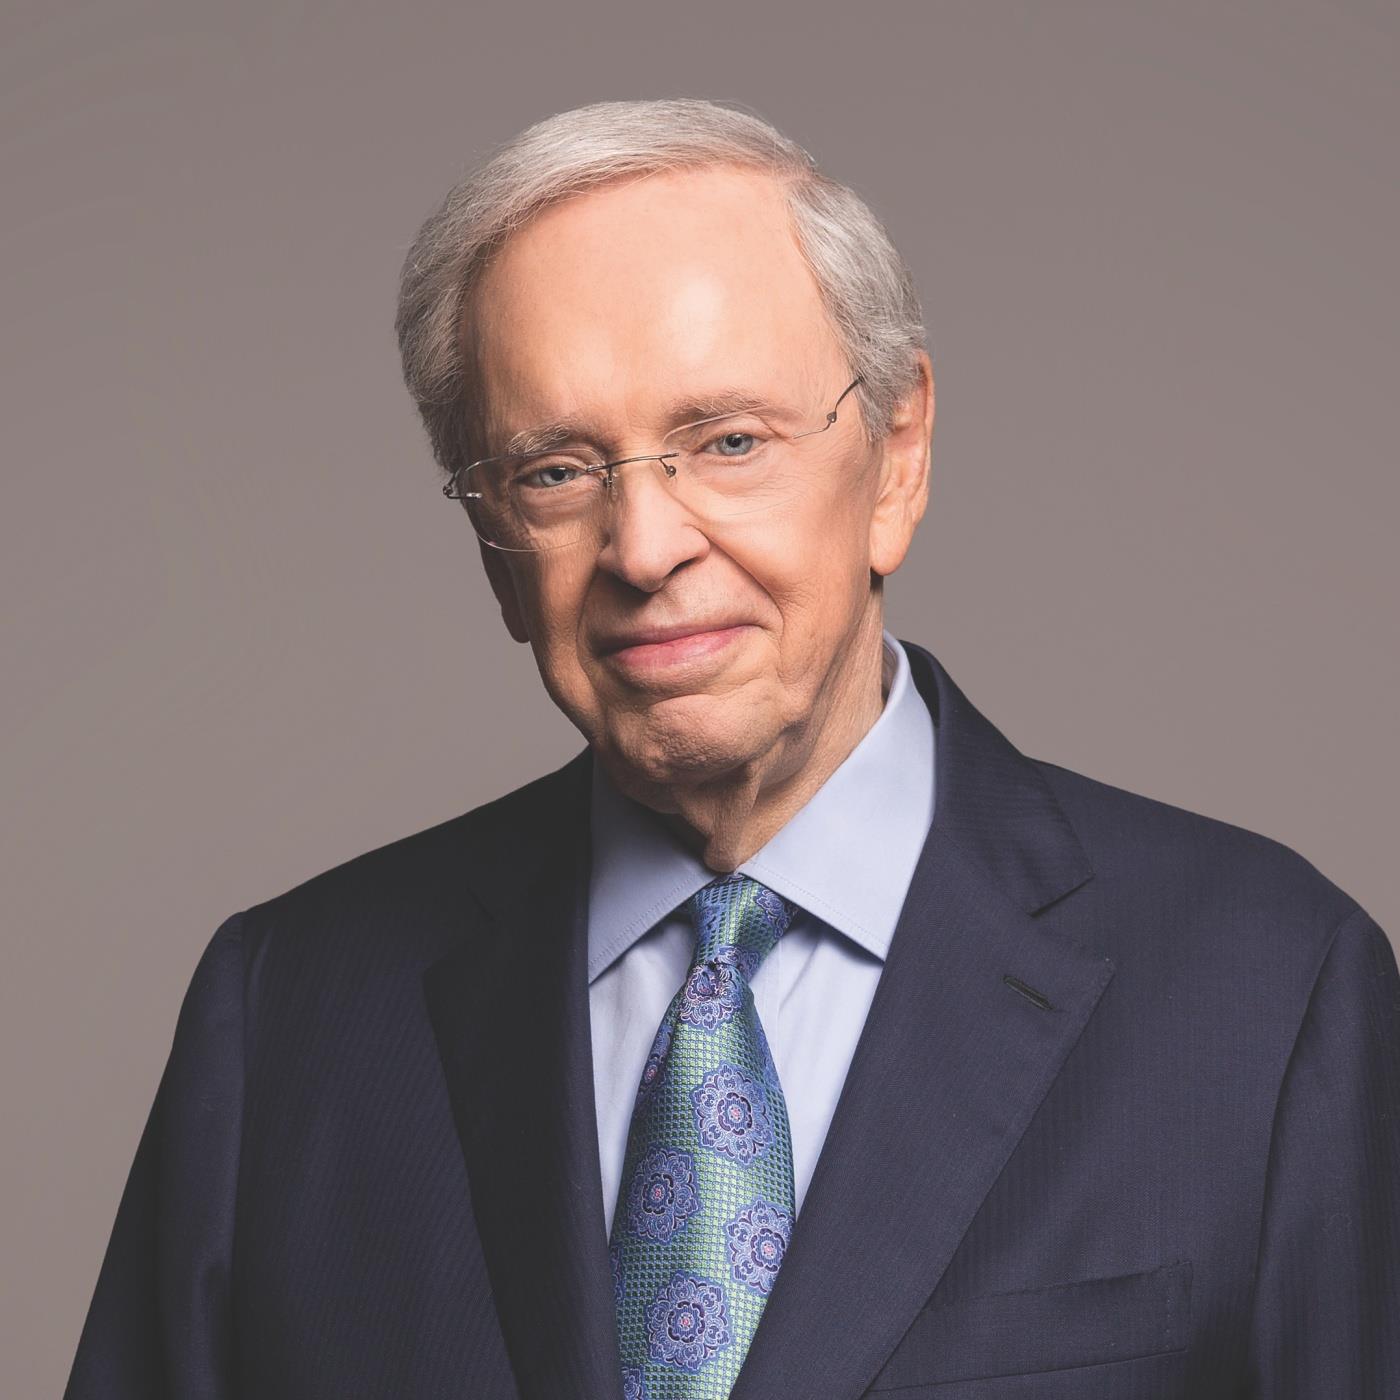 CHARLES STANLEY'S MINISTRIES